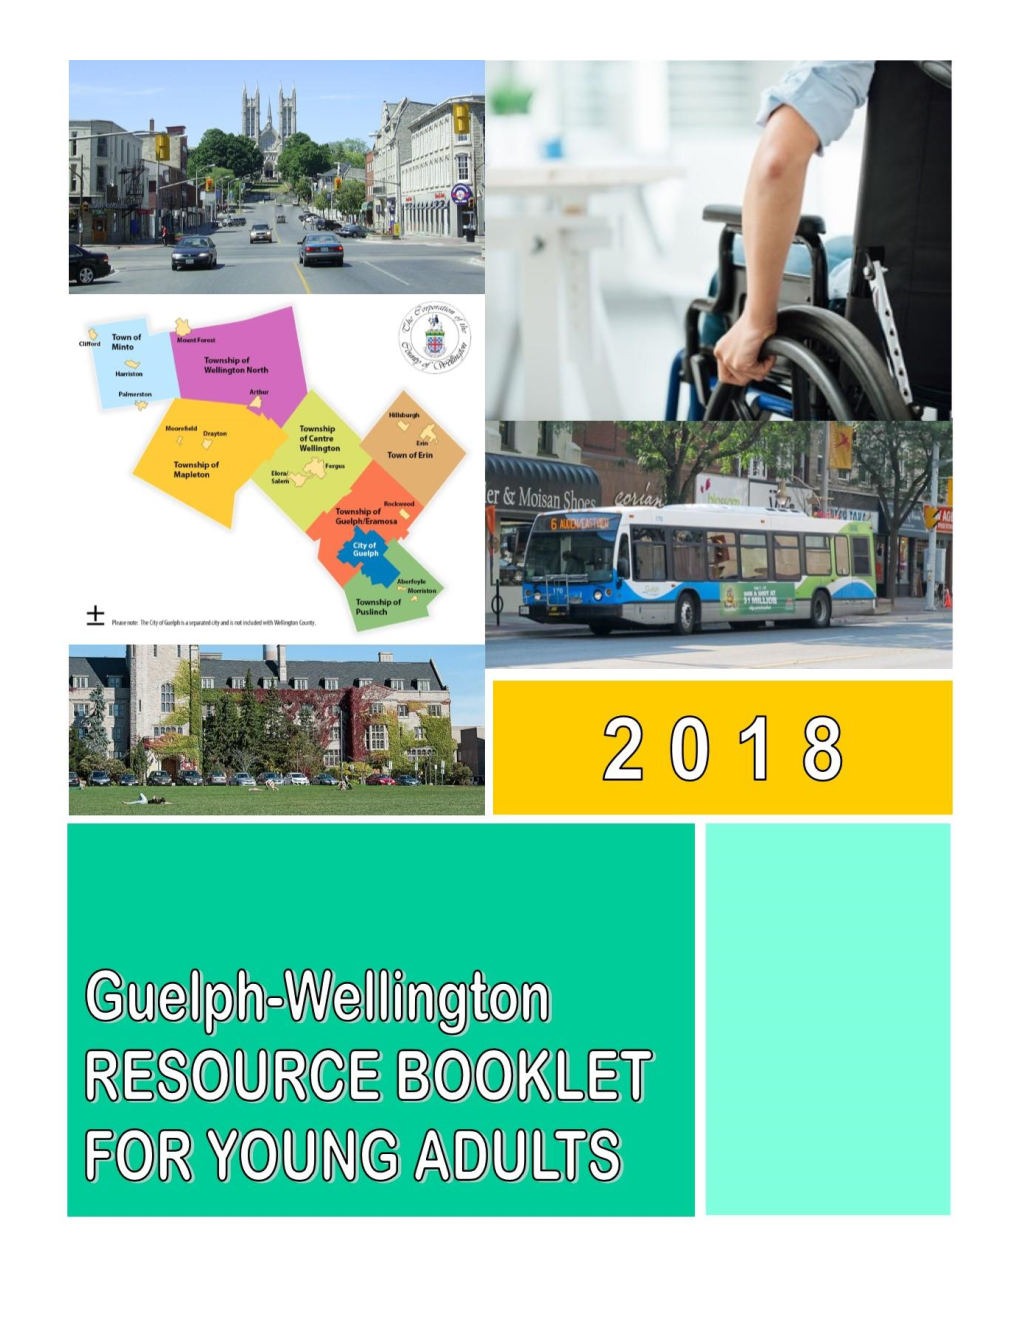 Guelph Wellington Resource Booklet for Young Adults 2018